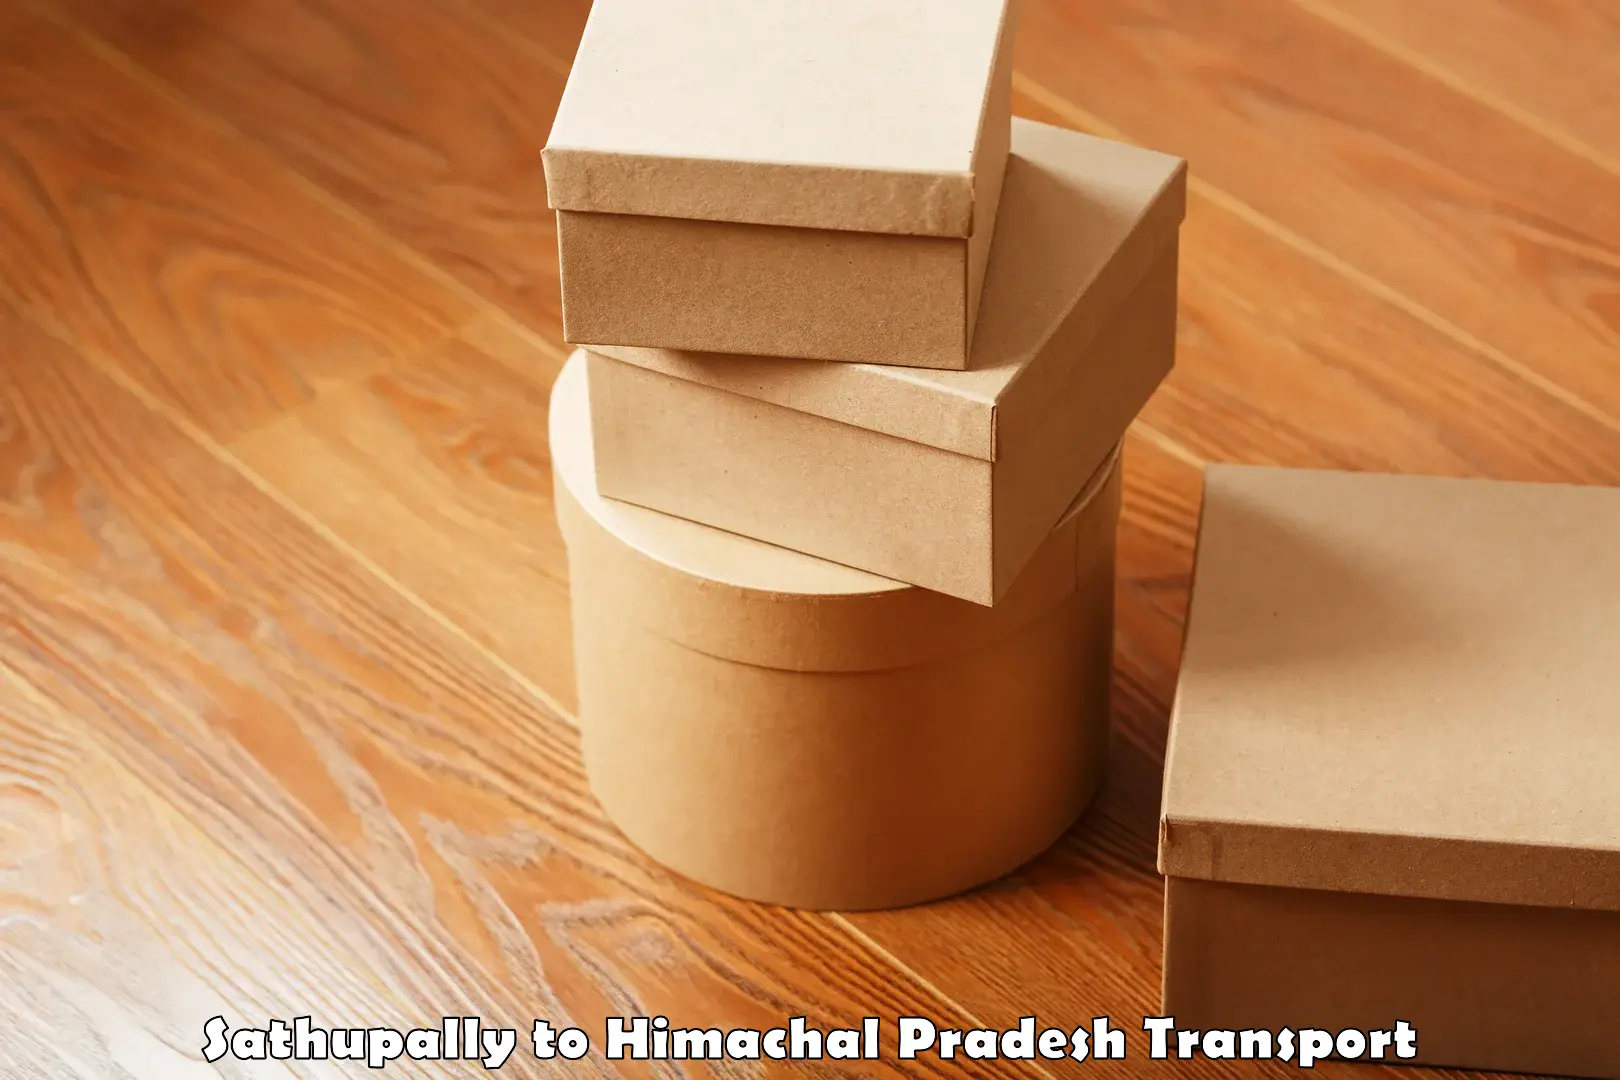 Commercial transport service Sathupally to Himachal Pradesh